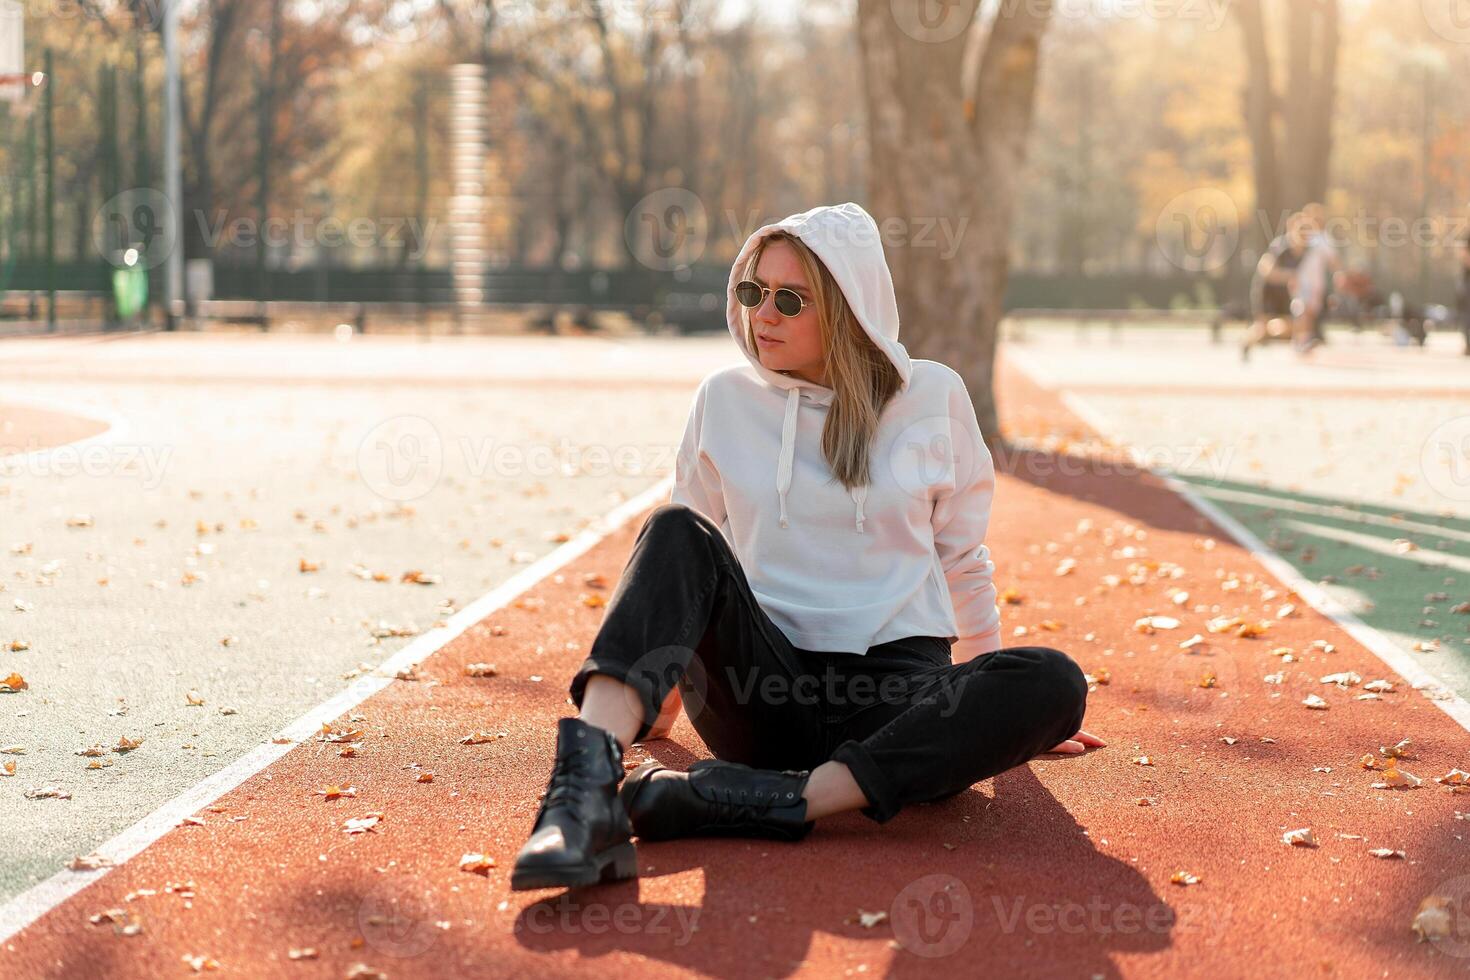 Outdoor portrait of young beautiful woman with long in sunglasses and a white hooded sweater sitting on the sportsground track photo